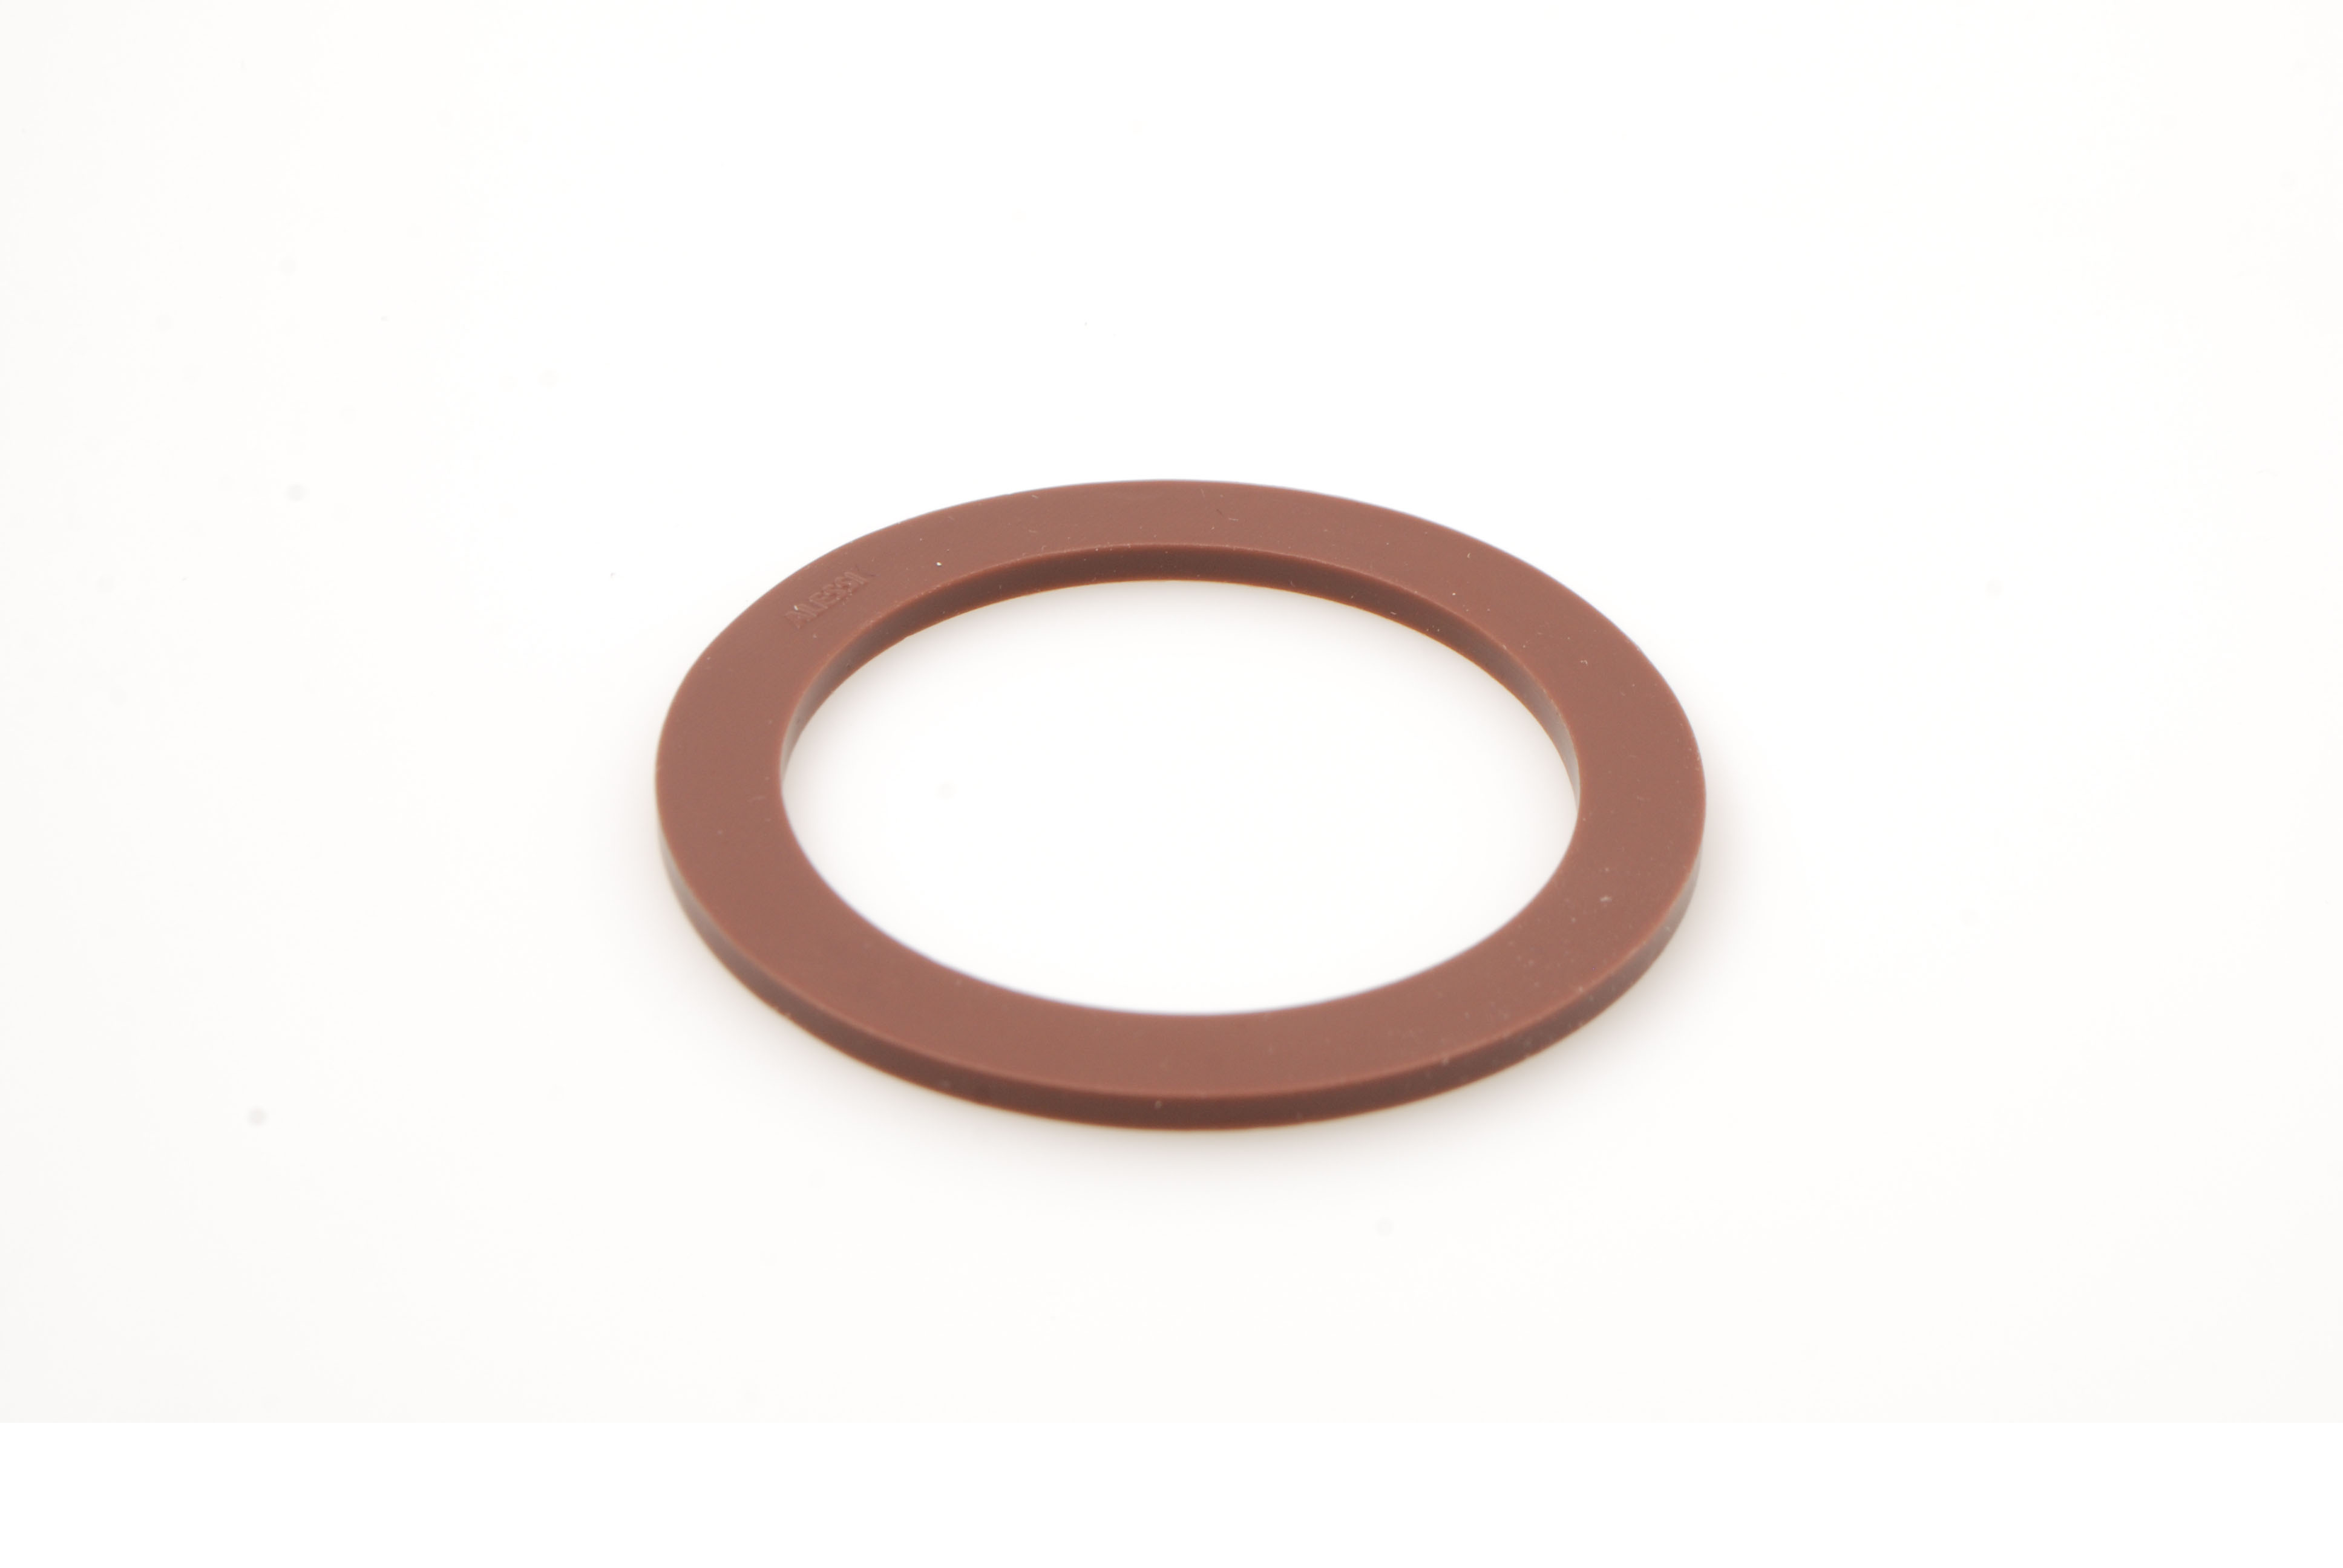 Alessi Rubber ring voor art ARS09/6-PL01/6-A9095/6-MG26/6